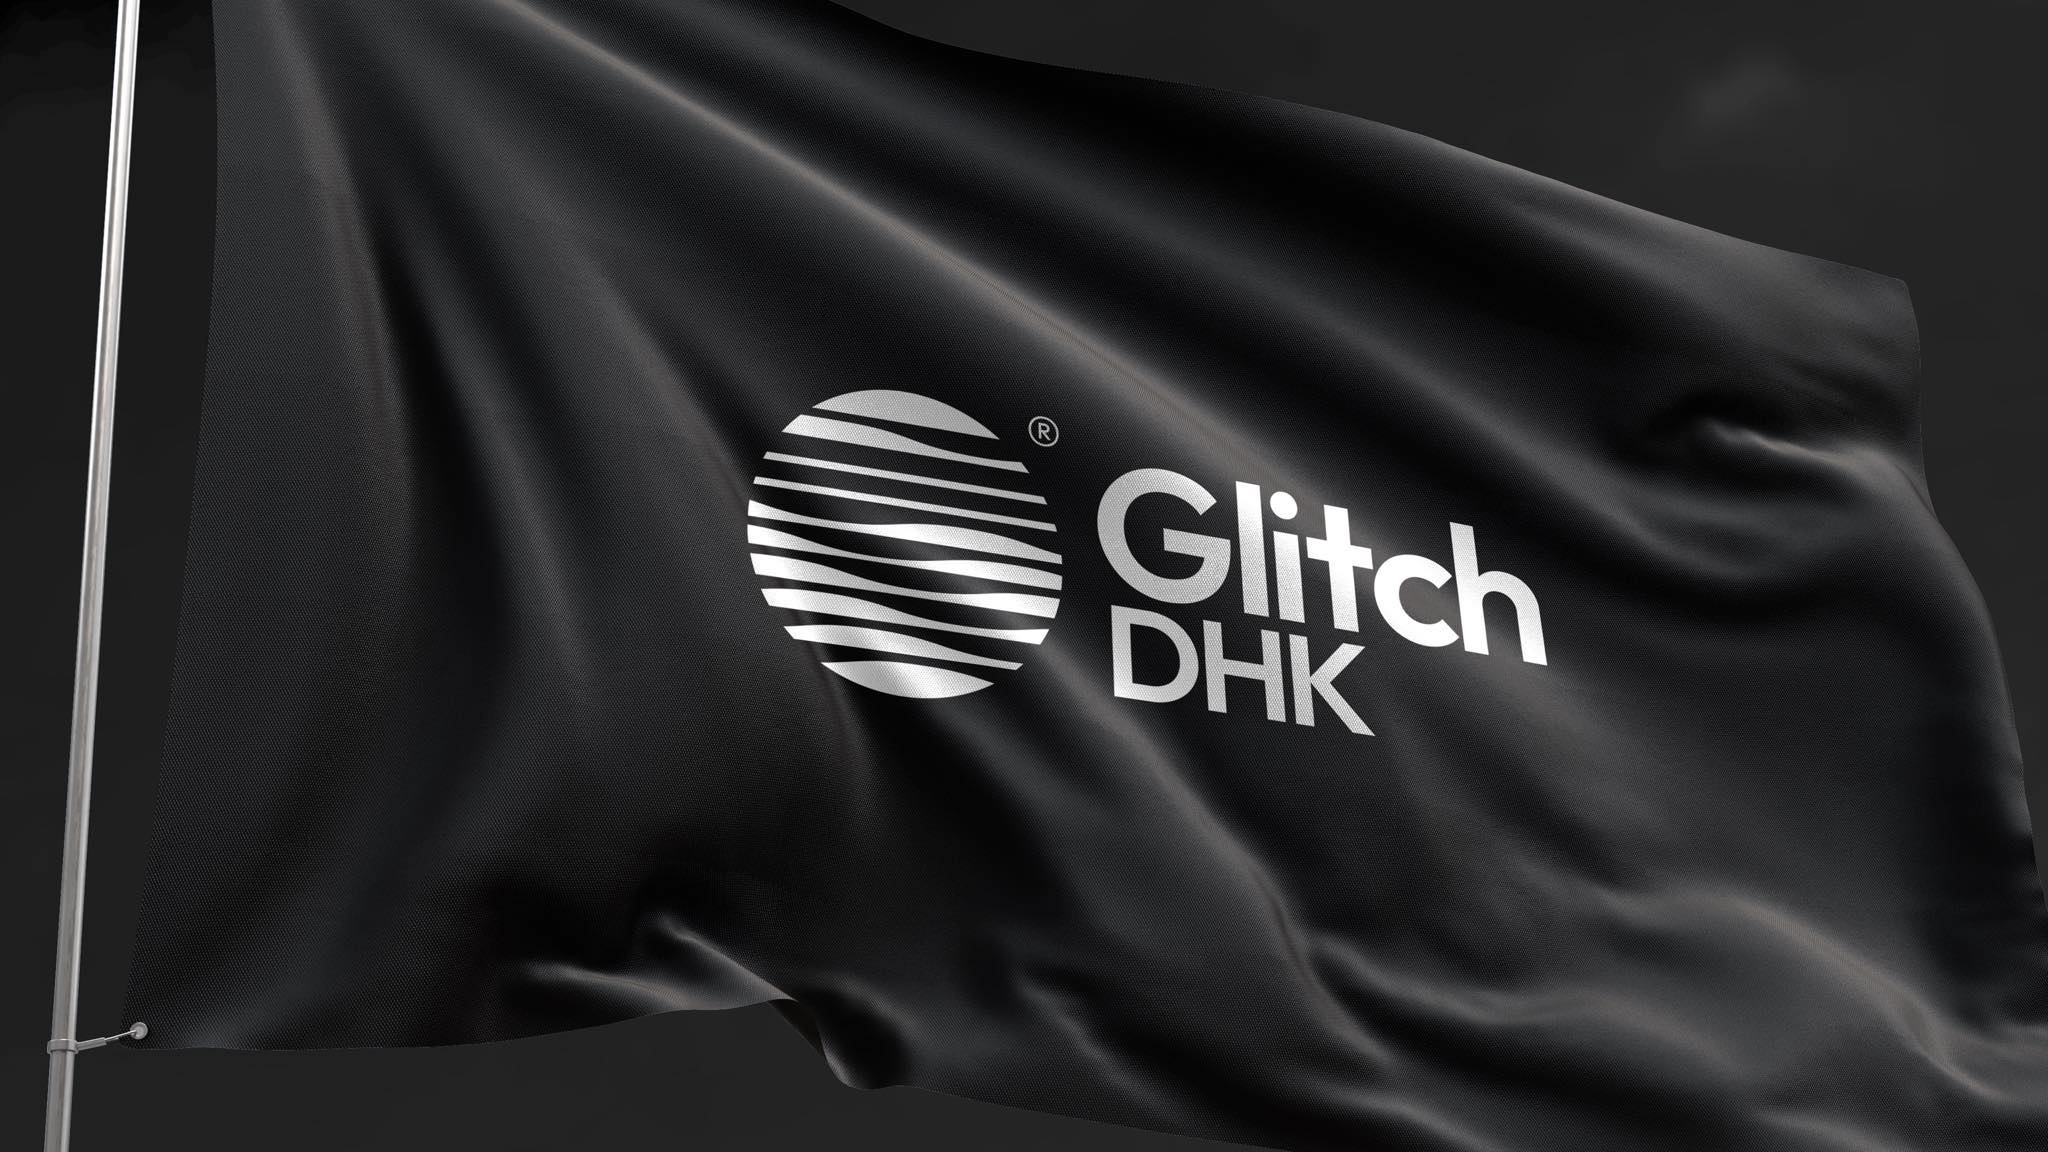 About-Glitch DHK Limited